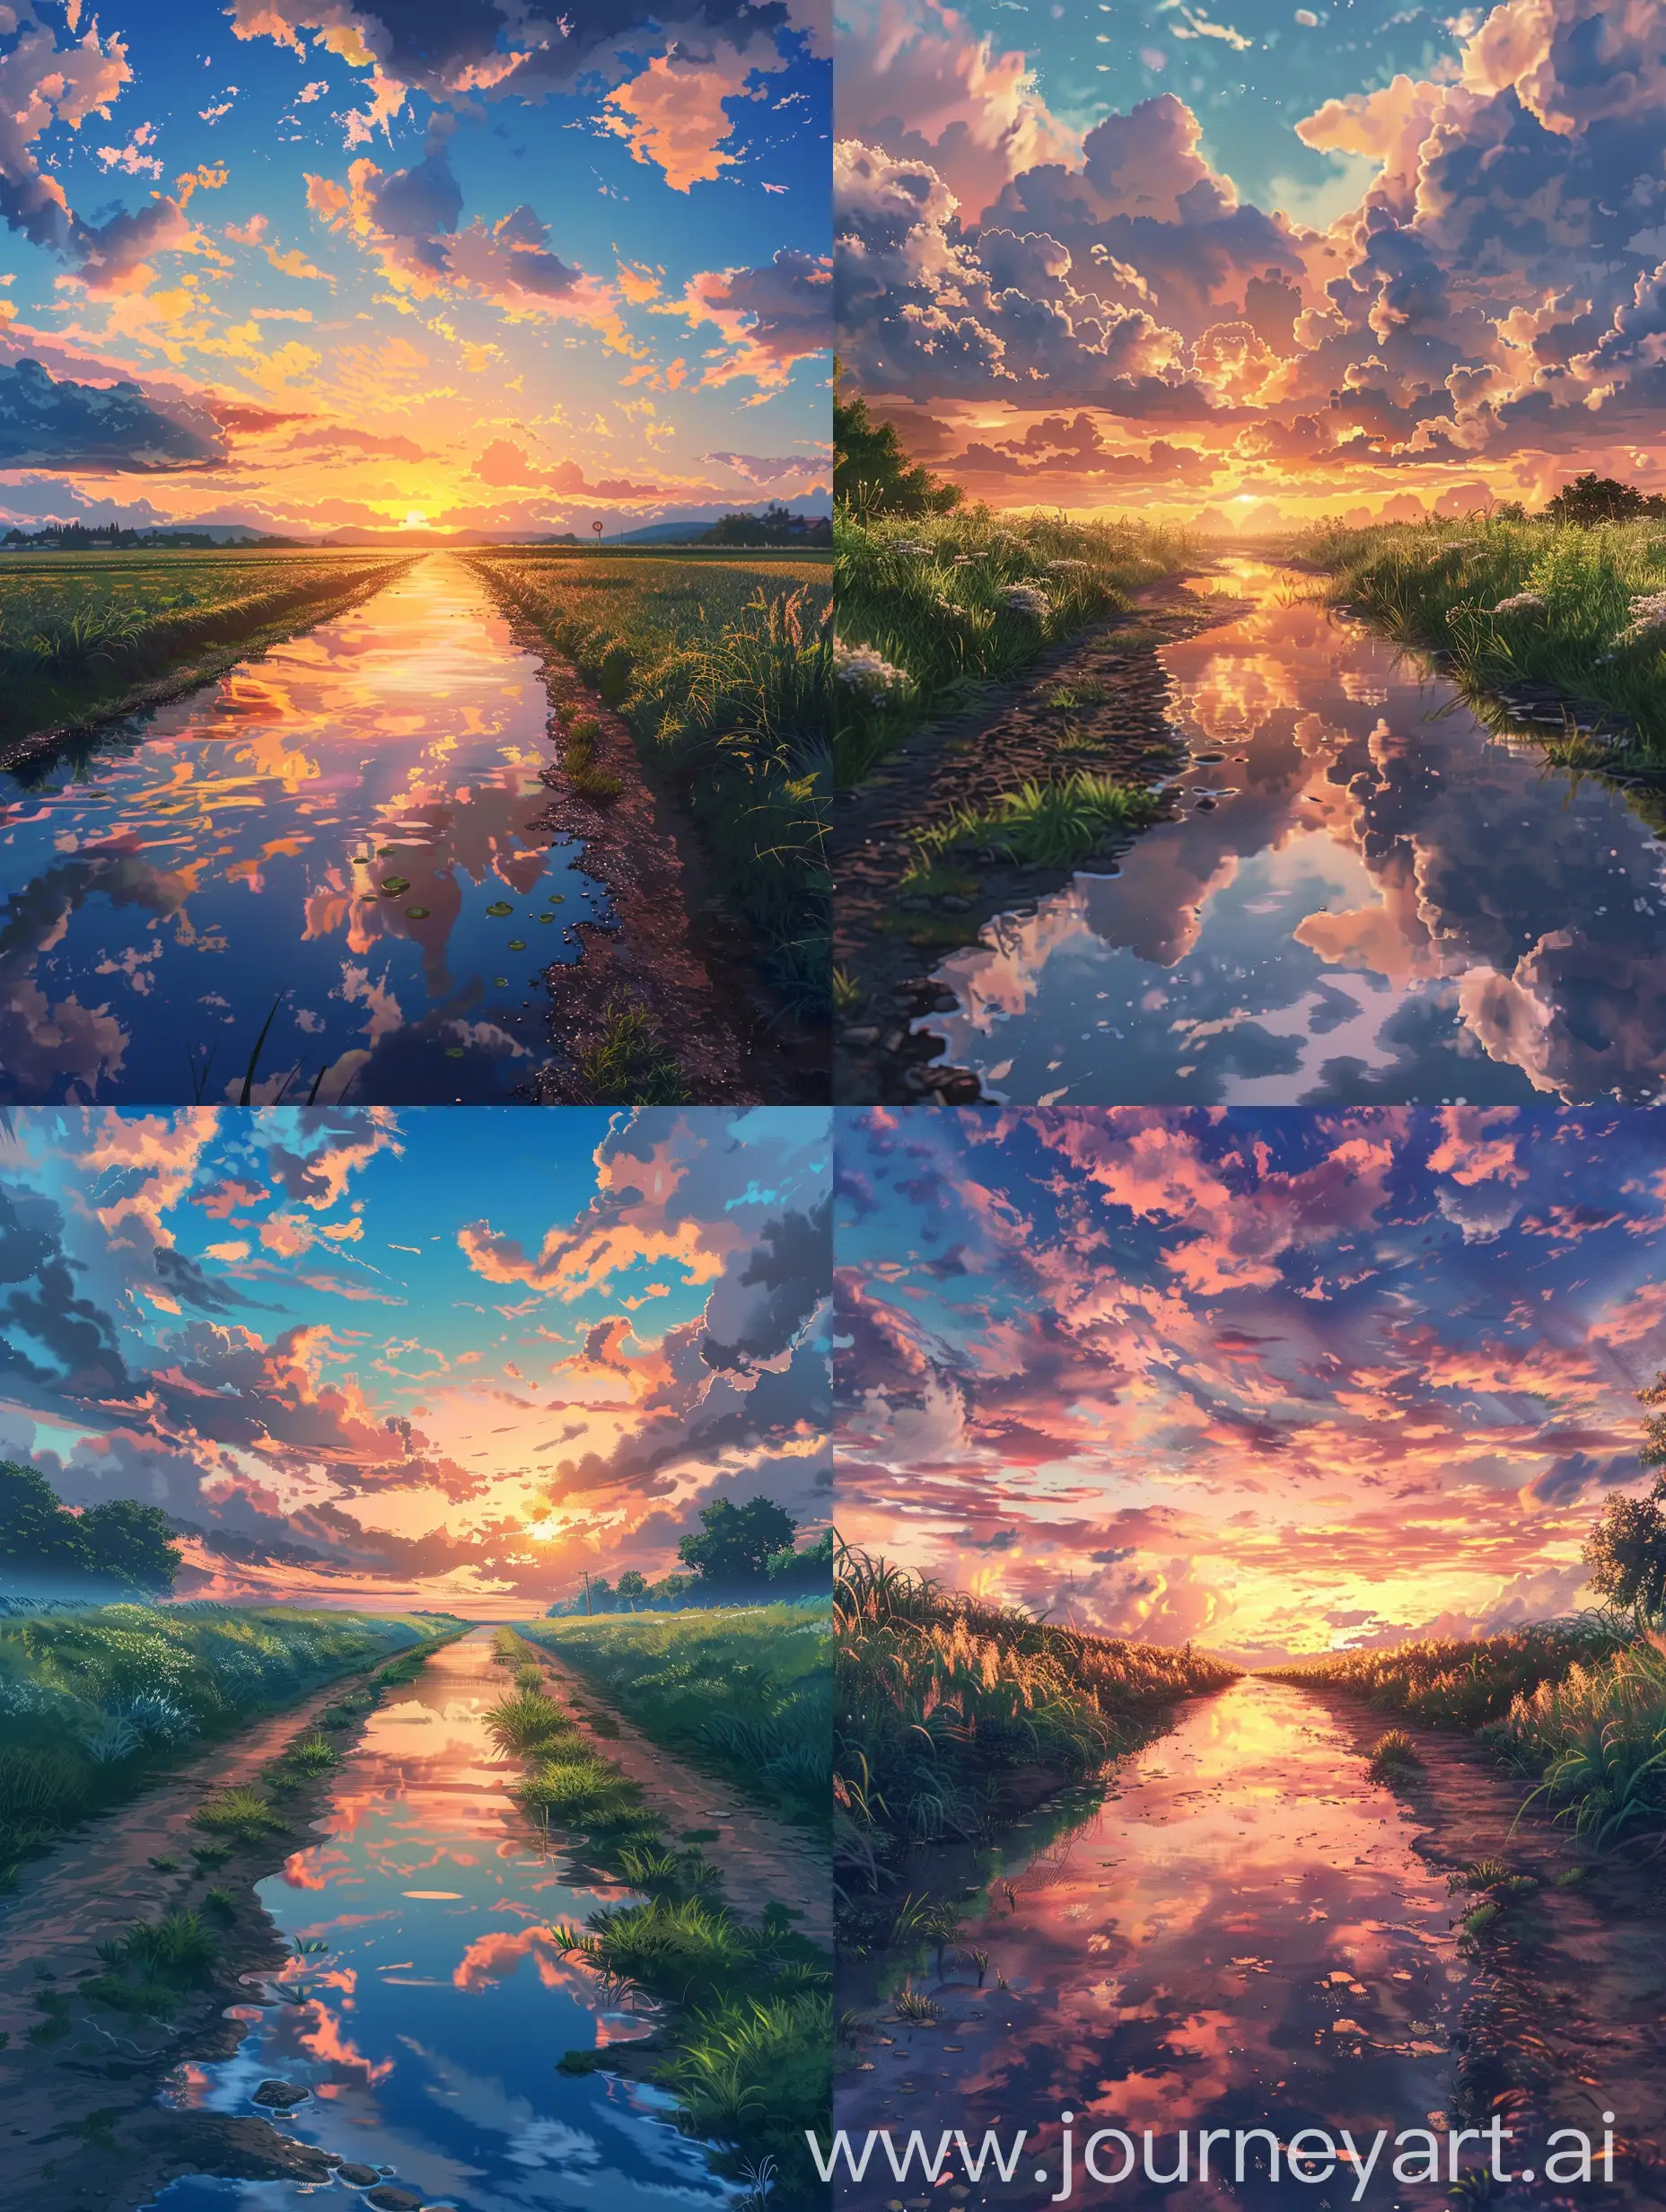 Beautiful anime style,Makato shinkai Style,the final blow down,beautiful,cinematic. (use renderer a anime movie like scene),a beautiful sunset but with an afternoon like view and feel,just a vibe.very few garss,dirt path,a very smal river reflecting the beautiful sky,beuatiful fluufy sky,summers.